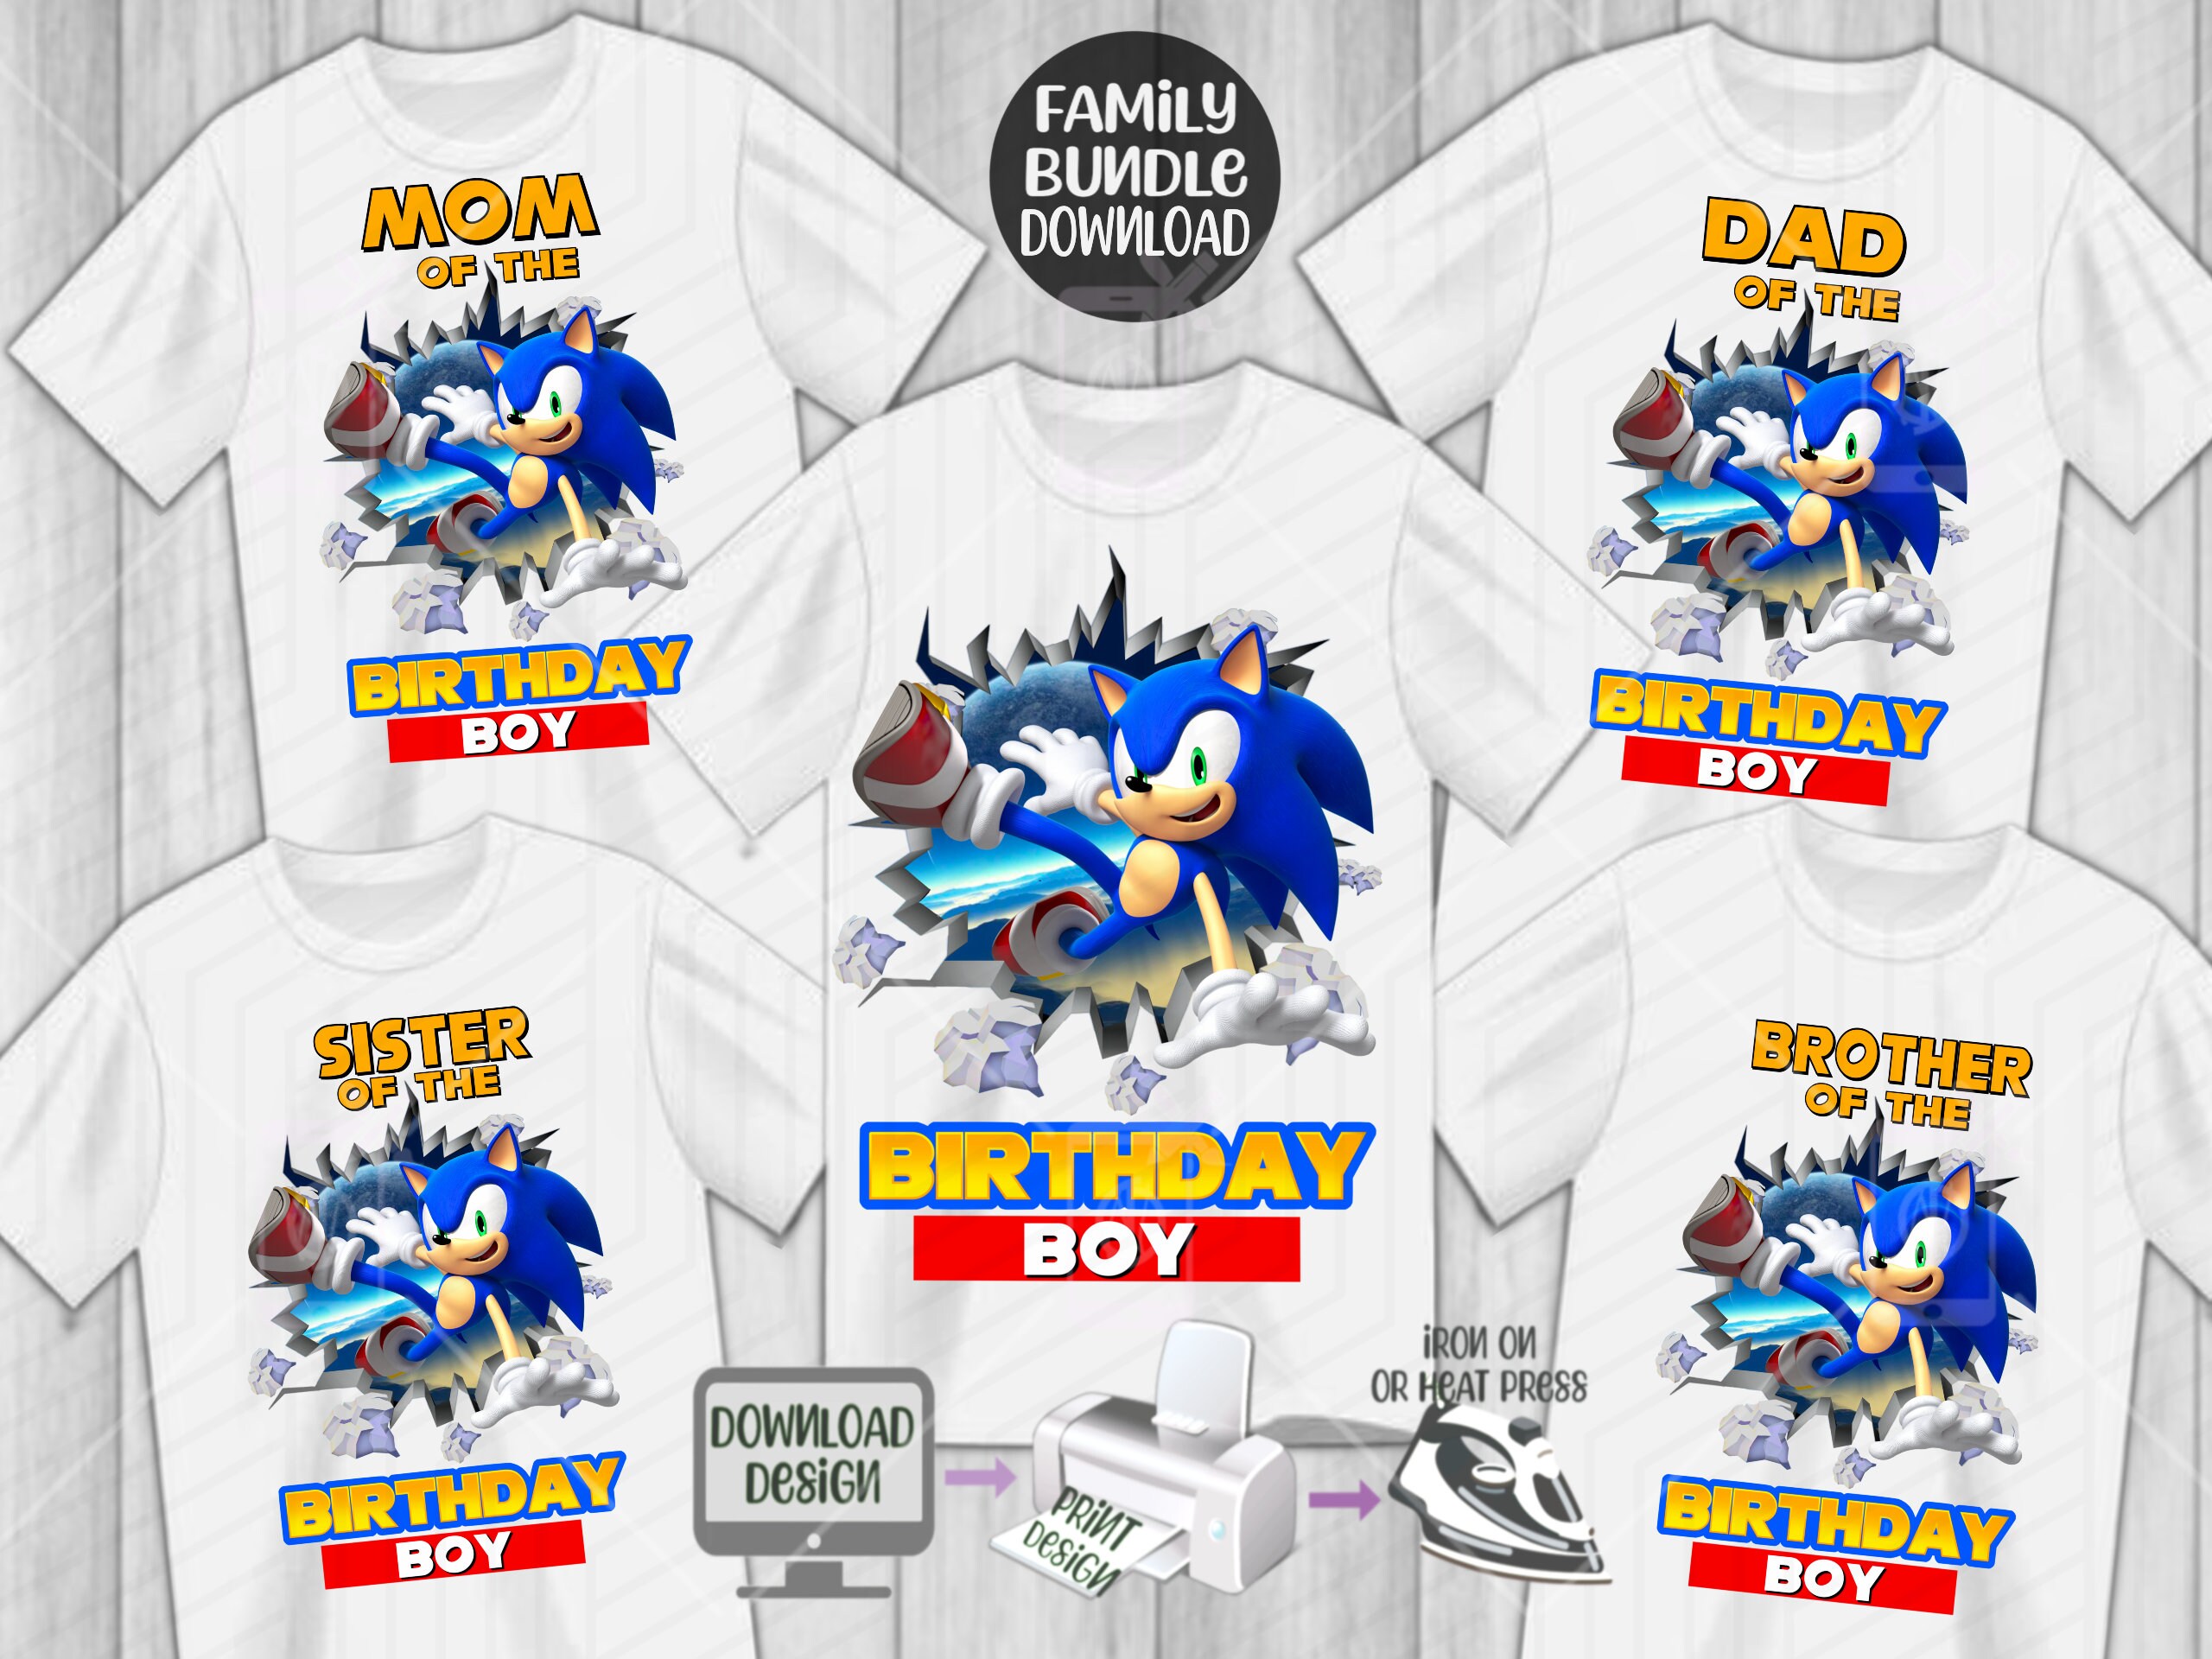 Sonic Shadow T Shirt Iron on Transfer Decal #19